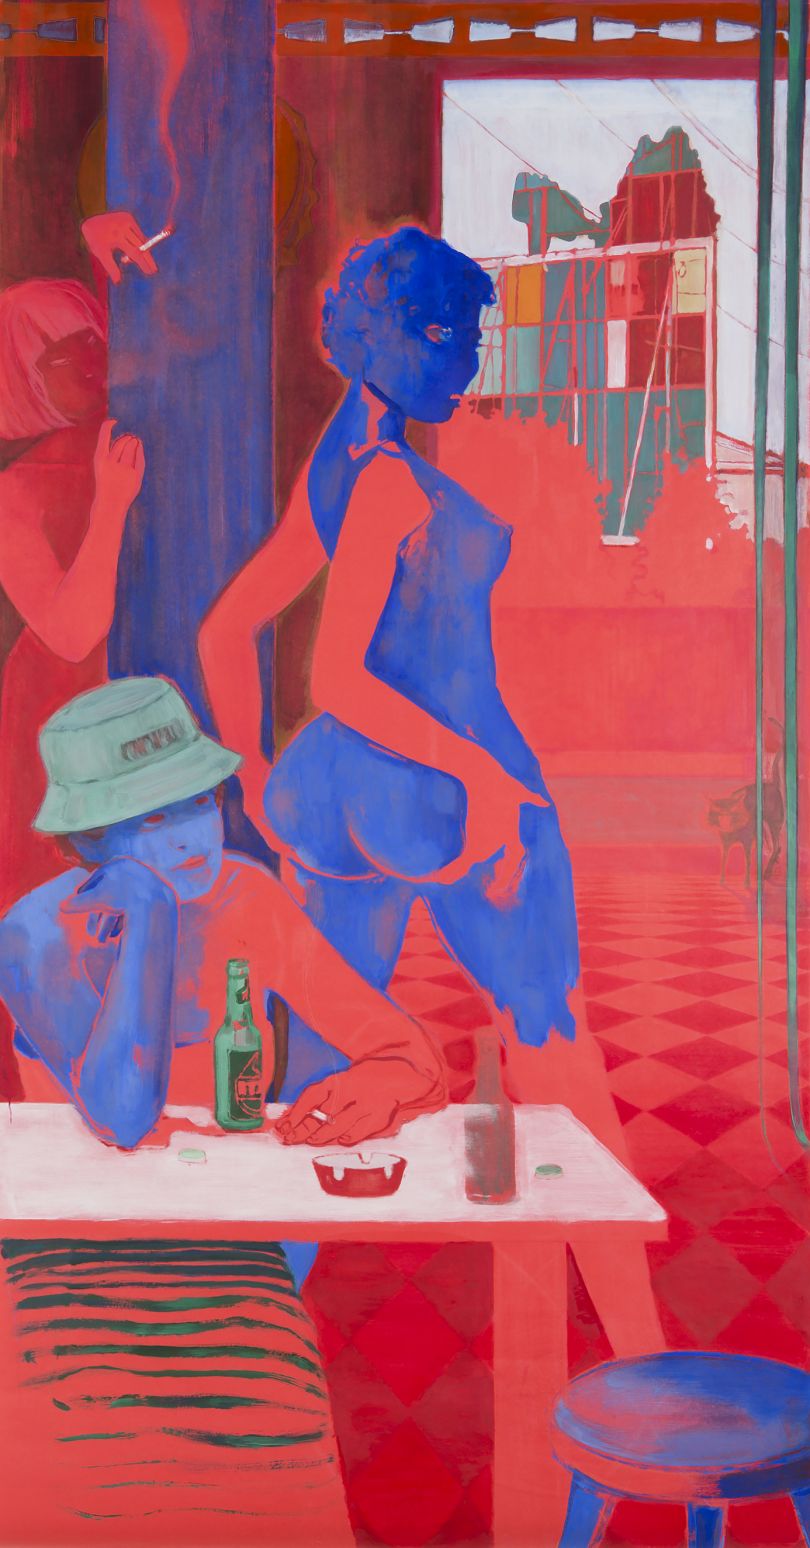 Lisa Brice (b.1968) Midday Drinking Den, after Embah I 2017 Oil on archival paper 2426 x 1303 mm Courtesy of the artist and Salon 94, New York © Lisa Brice